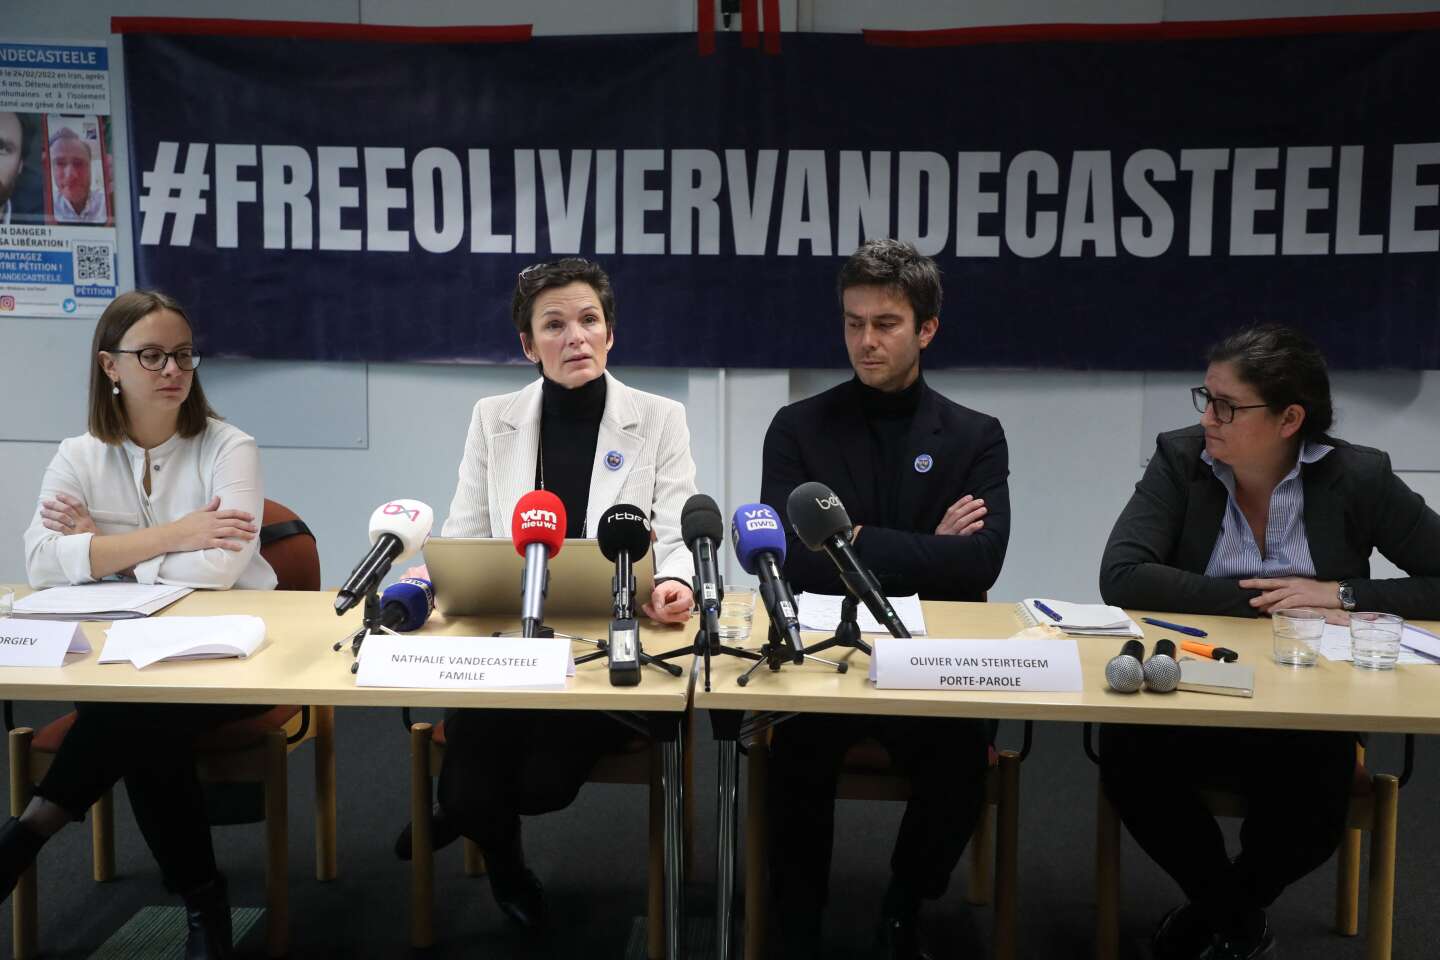 “The European Union has a role to play in obtaining the release of Olivier Vandecasteele”